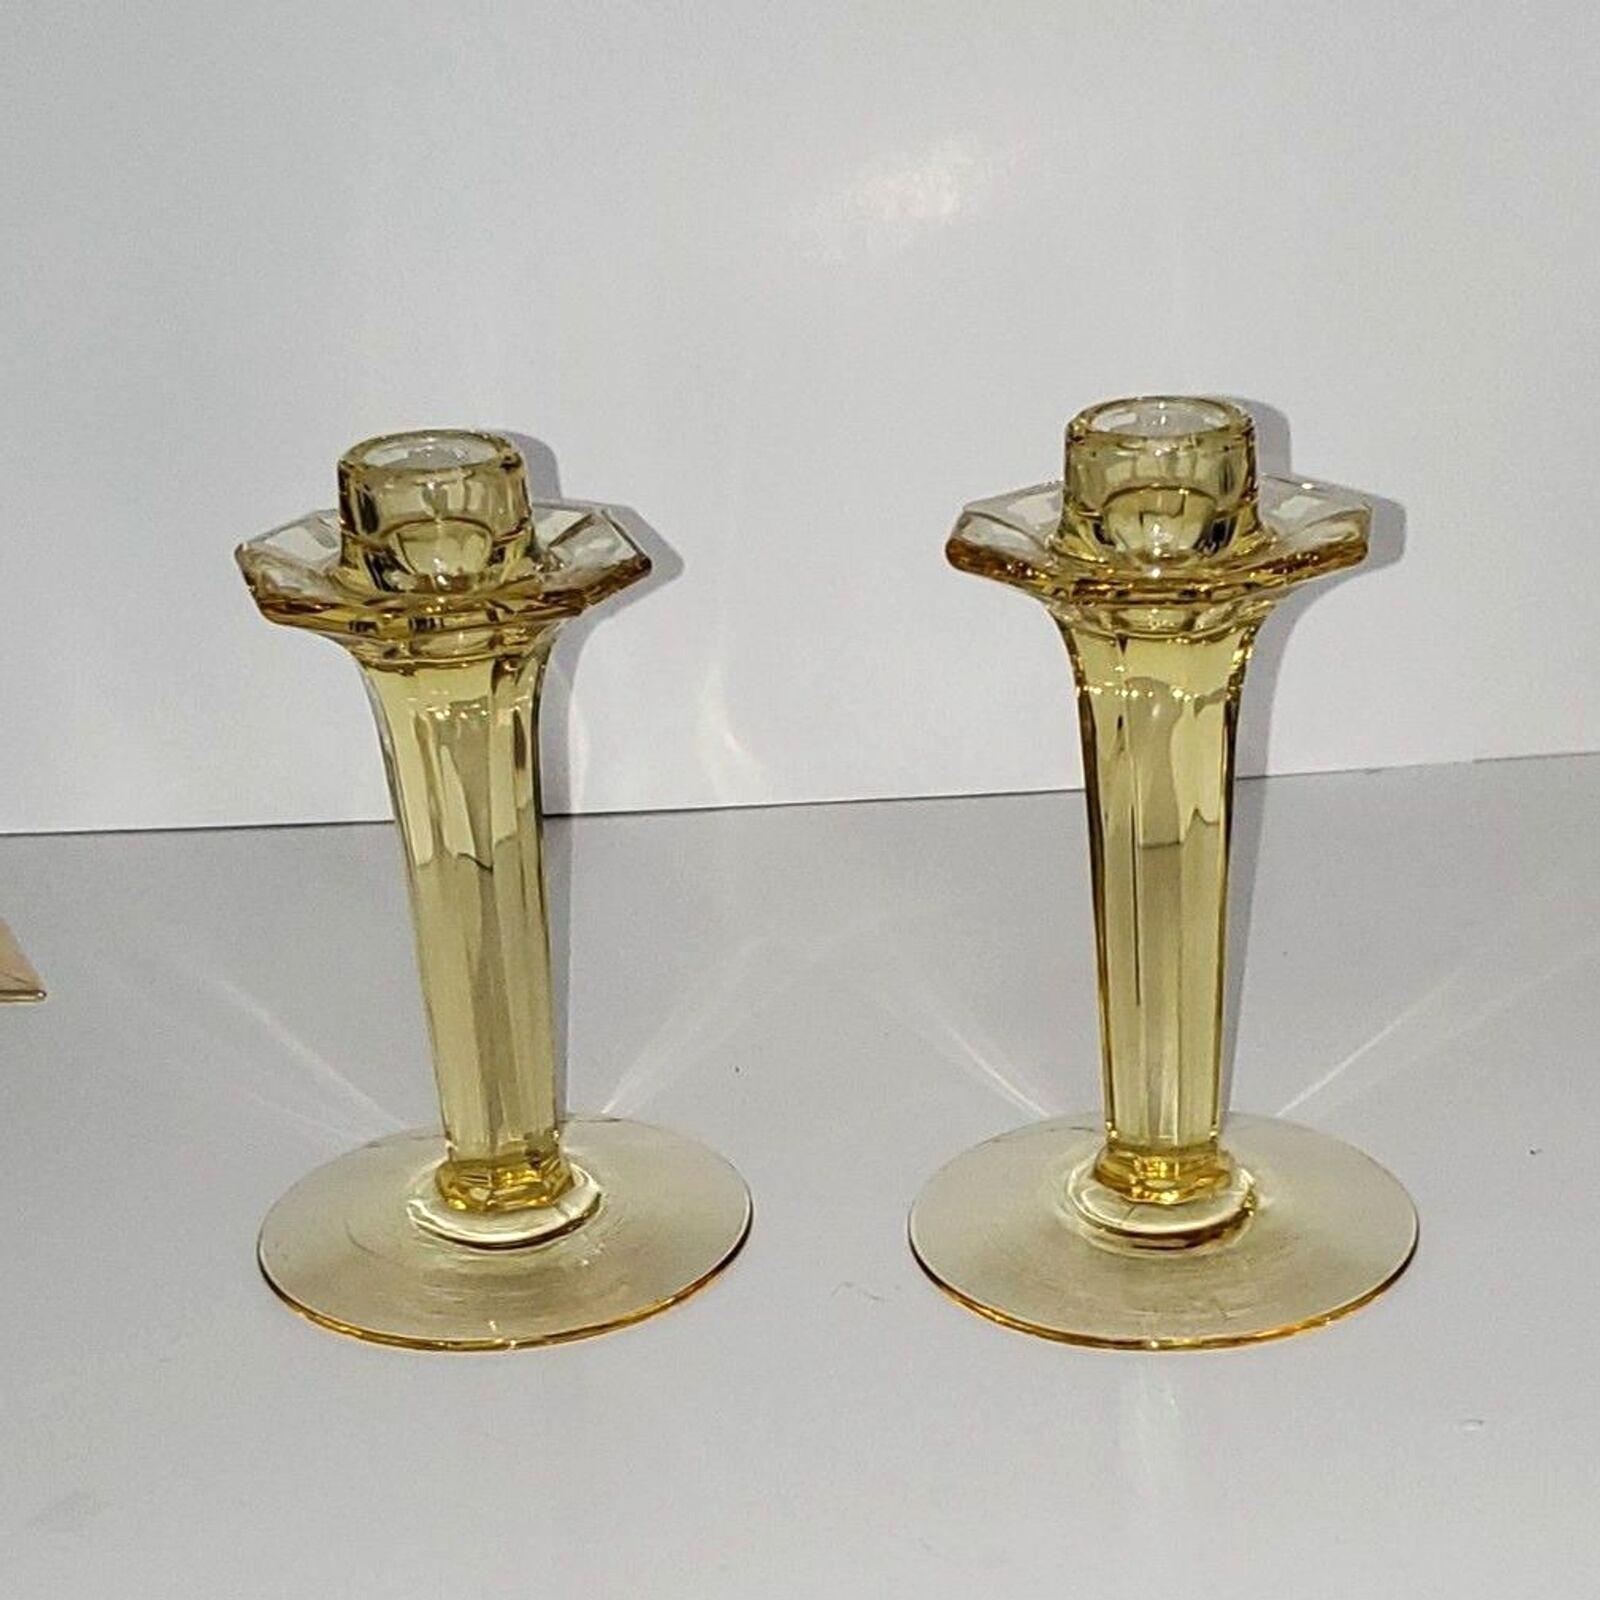 A Pair of Candlesticks Yellow Glass Vintage Home Decor Collectible HTF Rare